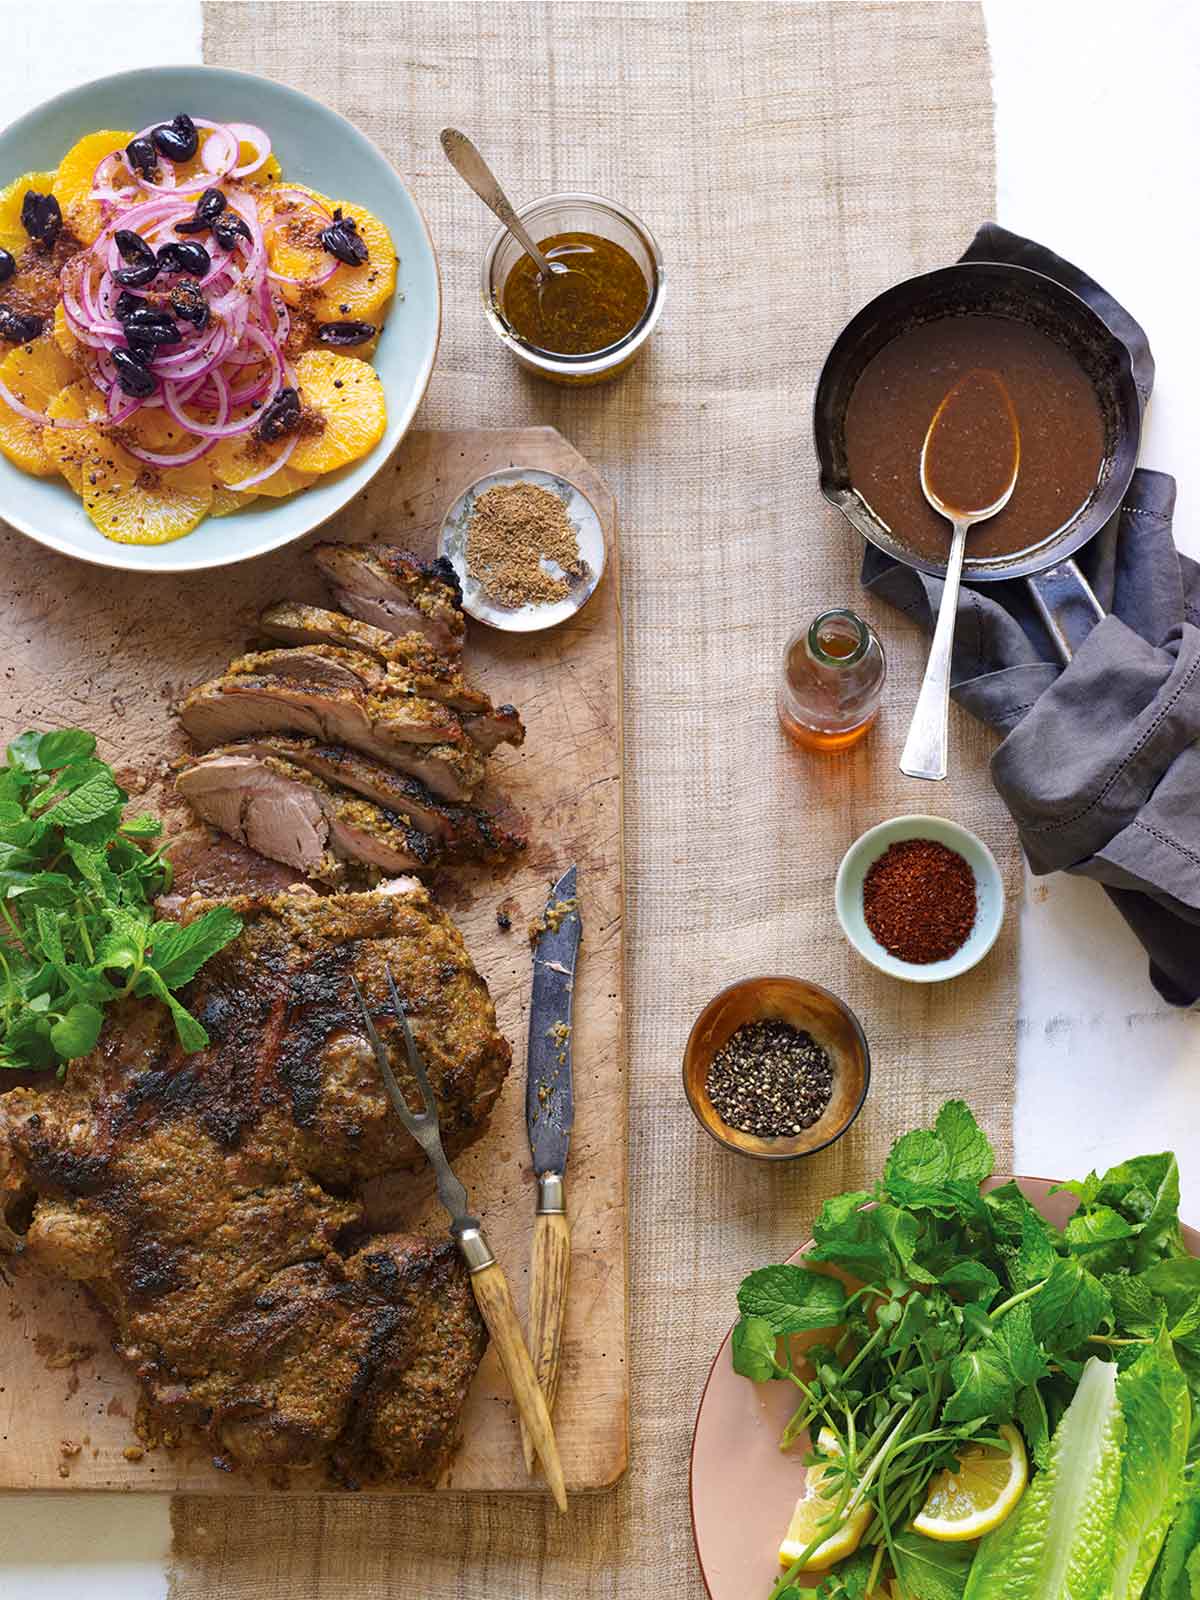 A wooden board with a partially carved leg of lamb with Moroccan spices, with side dishes and bowls of spices and gravy alongside.